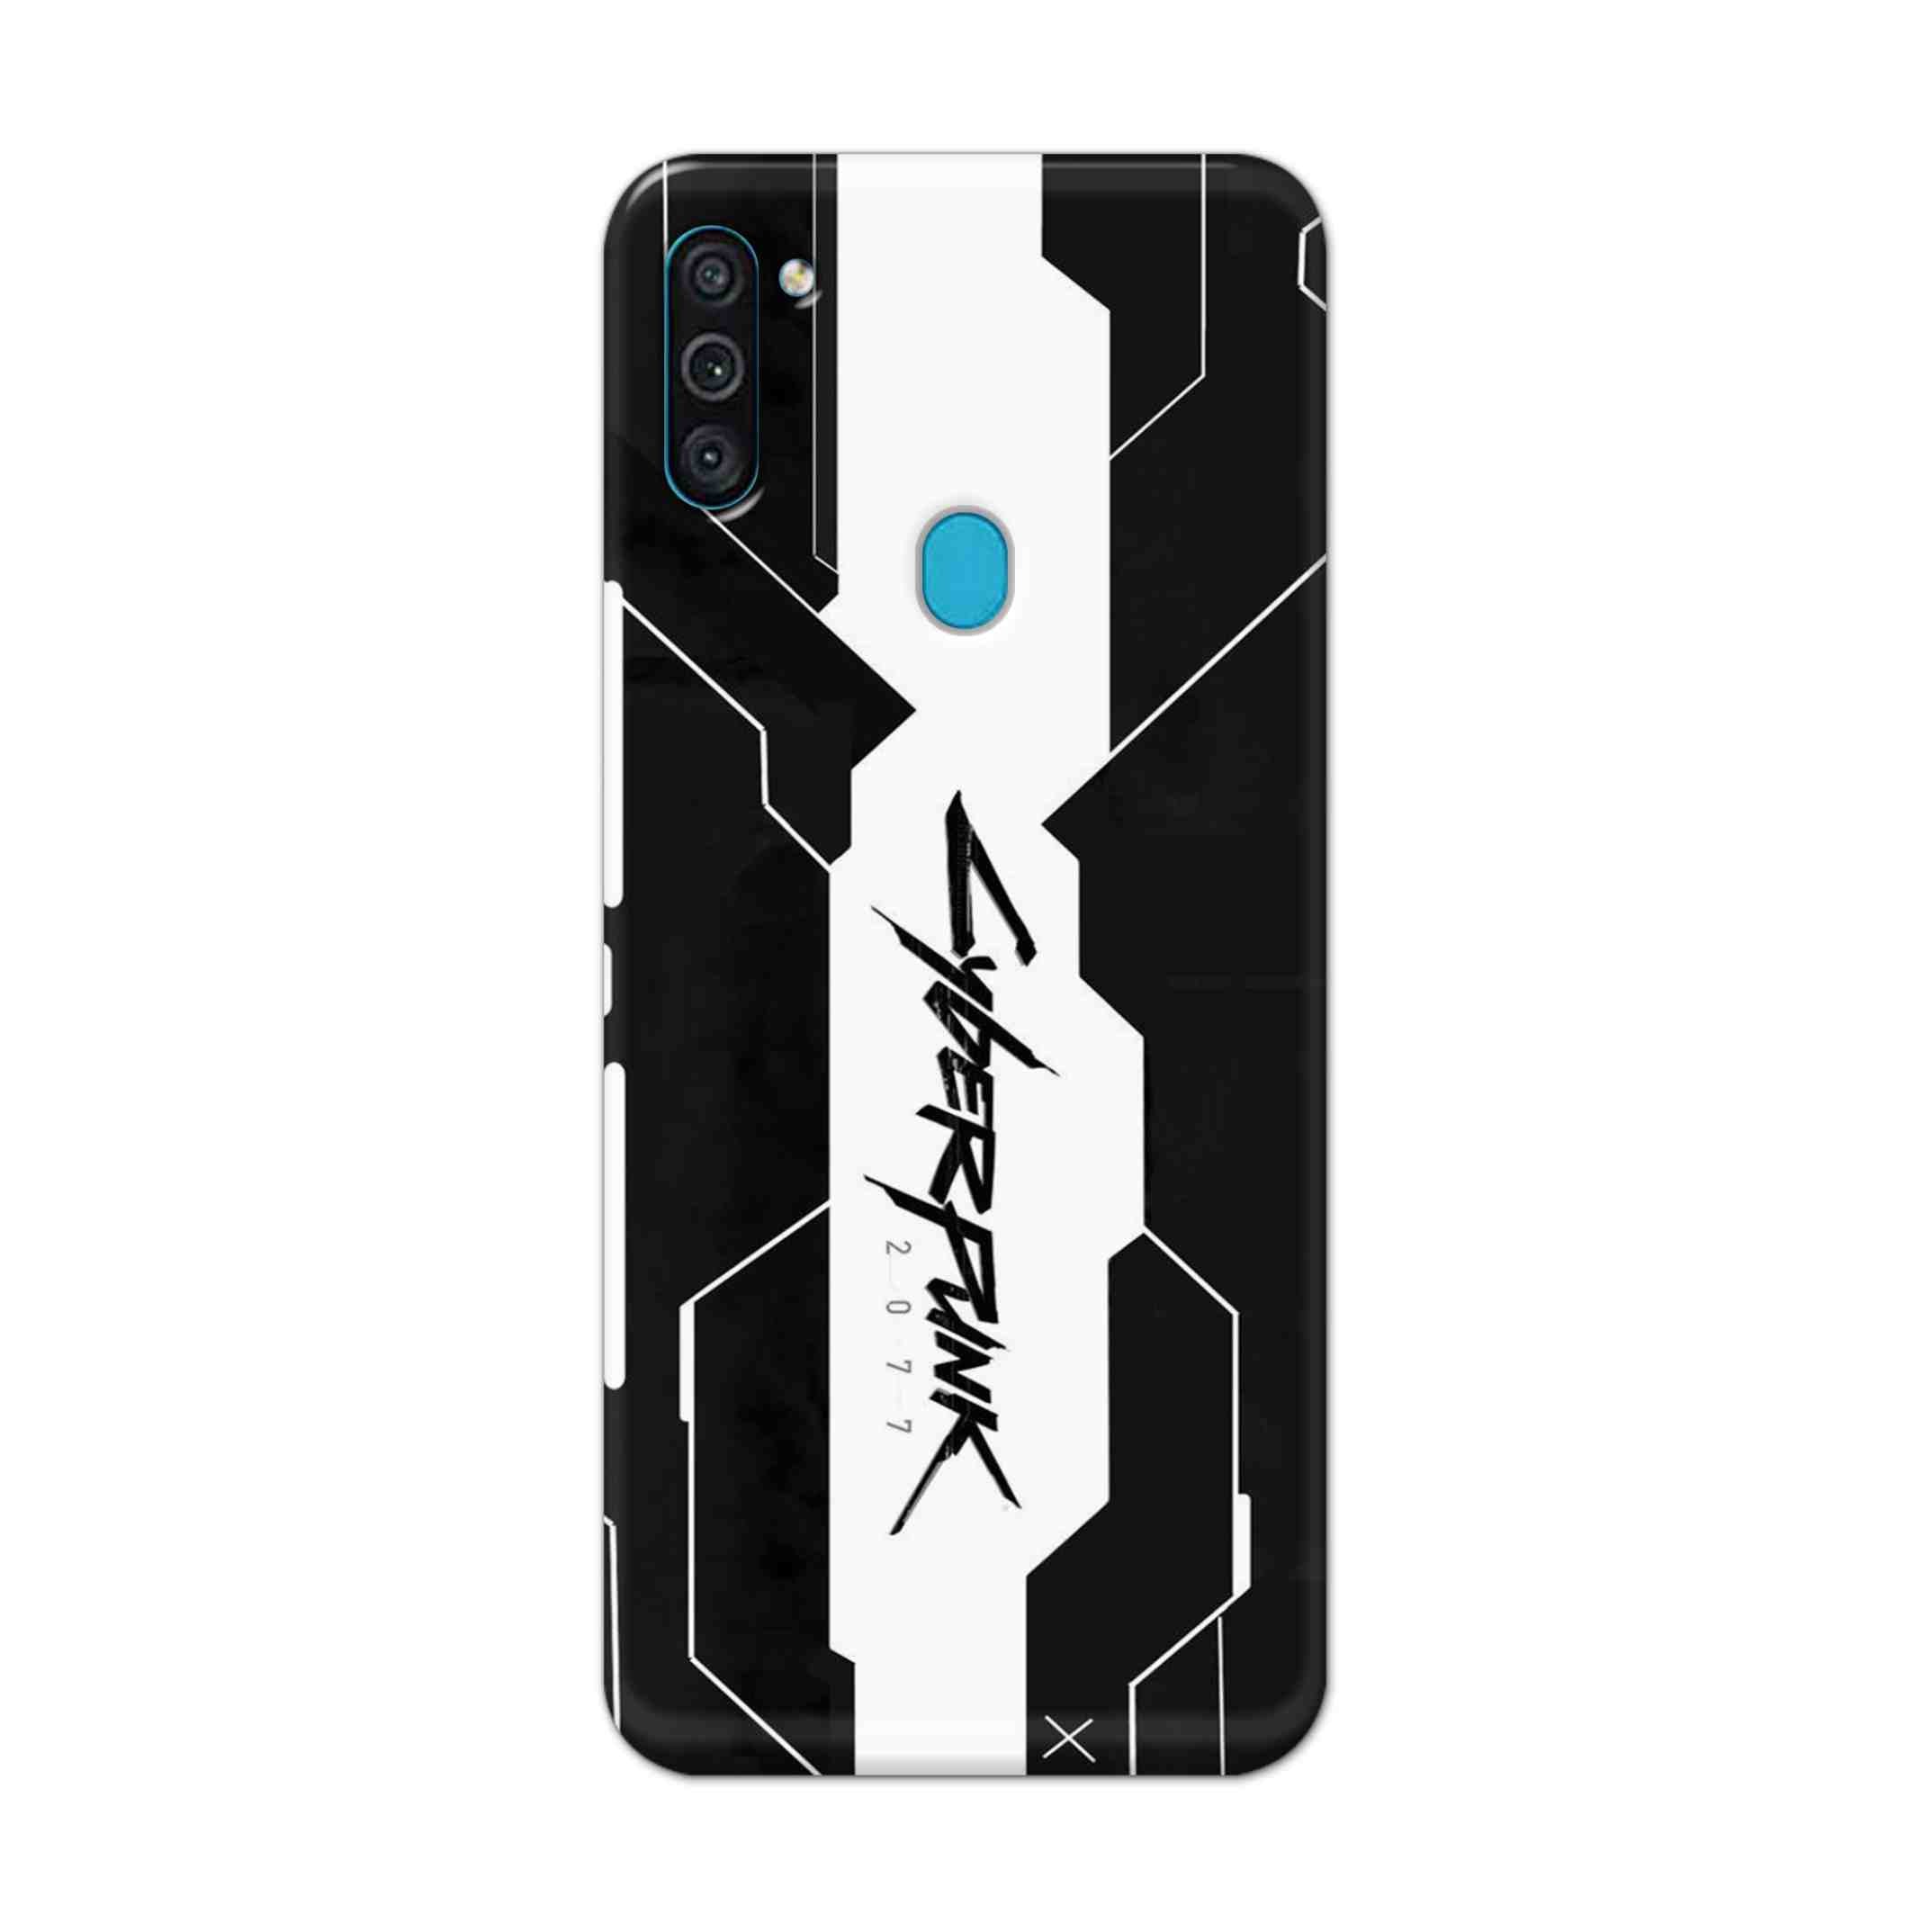 Buy Cyberpunk 2077 Art Hard Back Mobile Phone Case Cover For Samsung Galaxy M11 Online